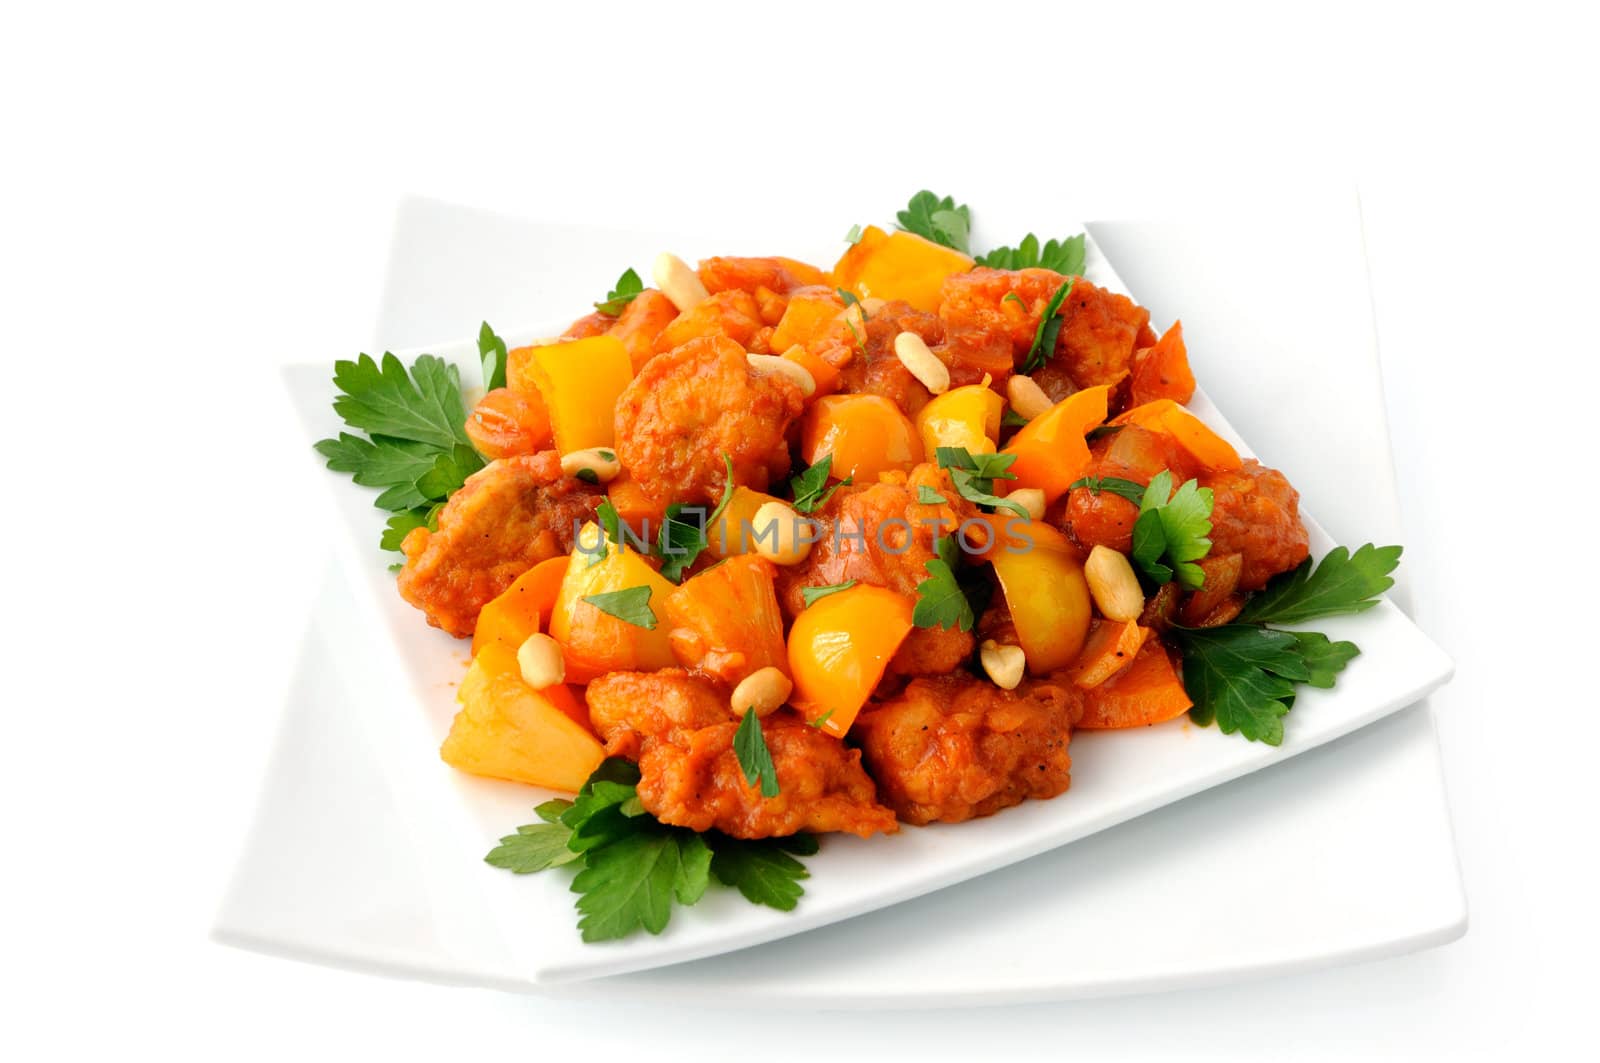 Pork in Batter Sweet and sour sauce by Apolonia